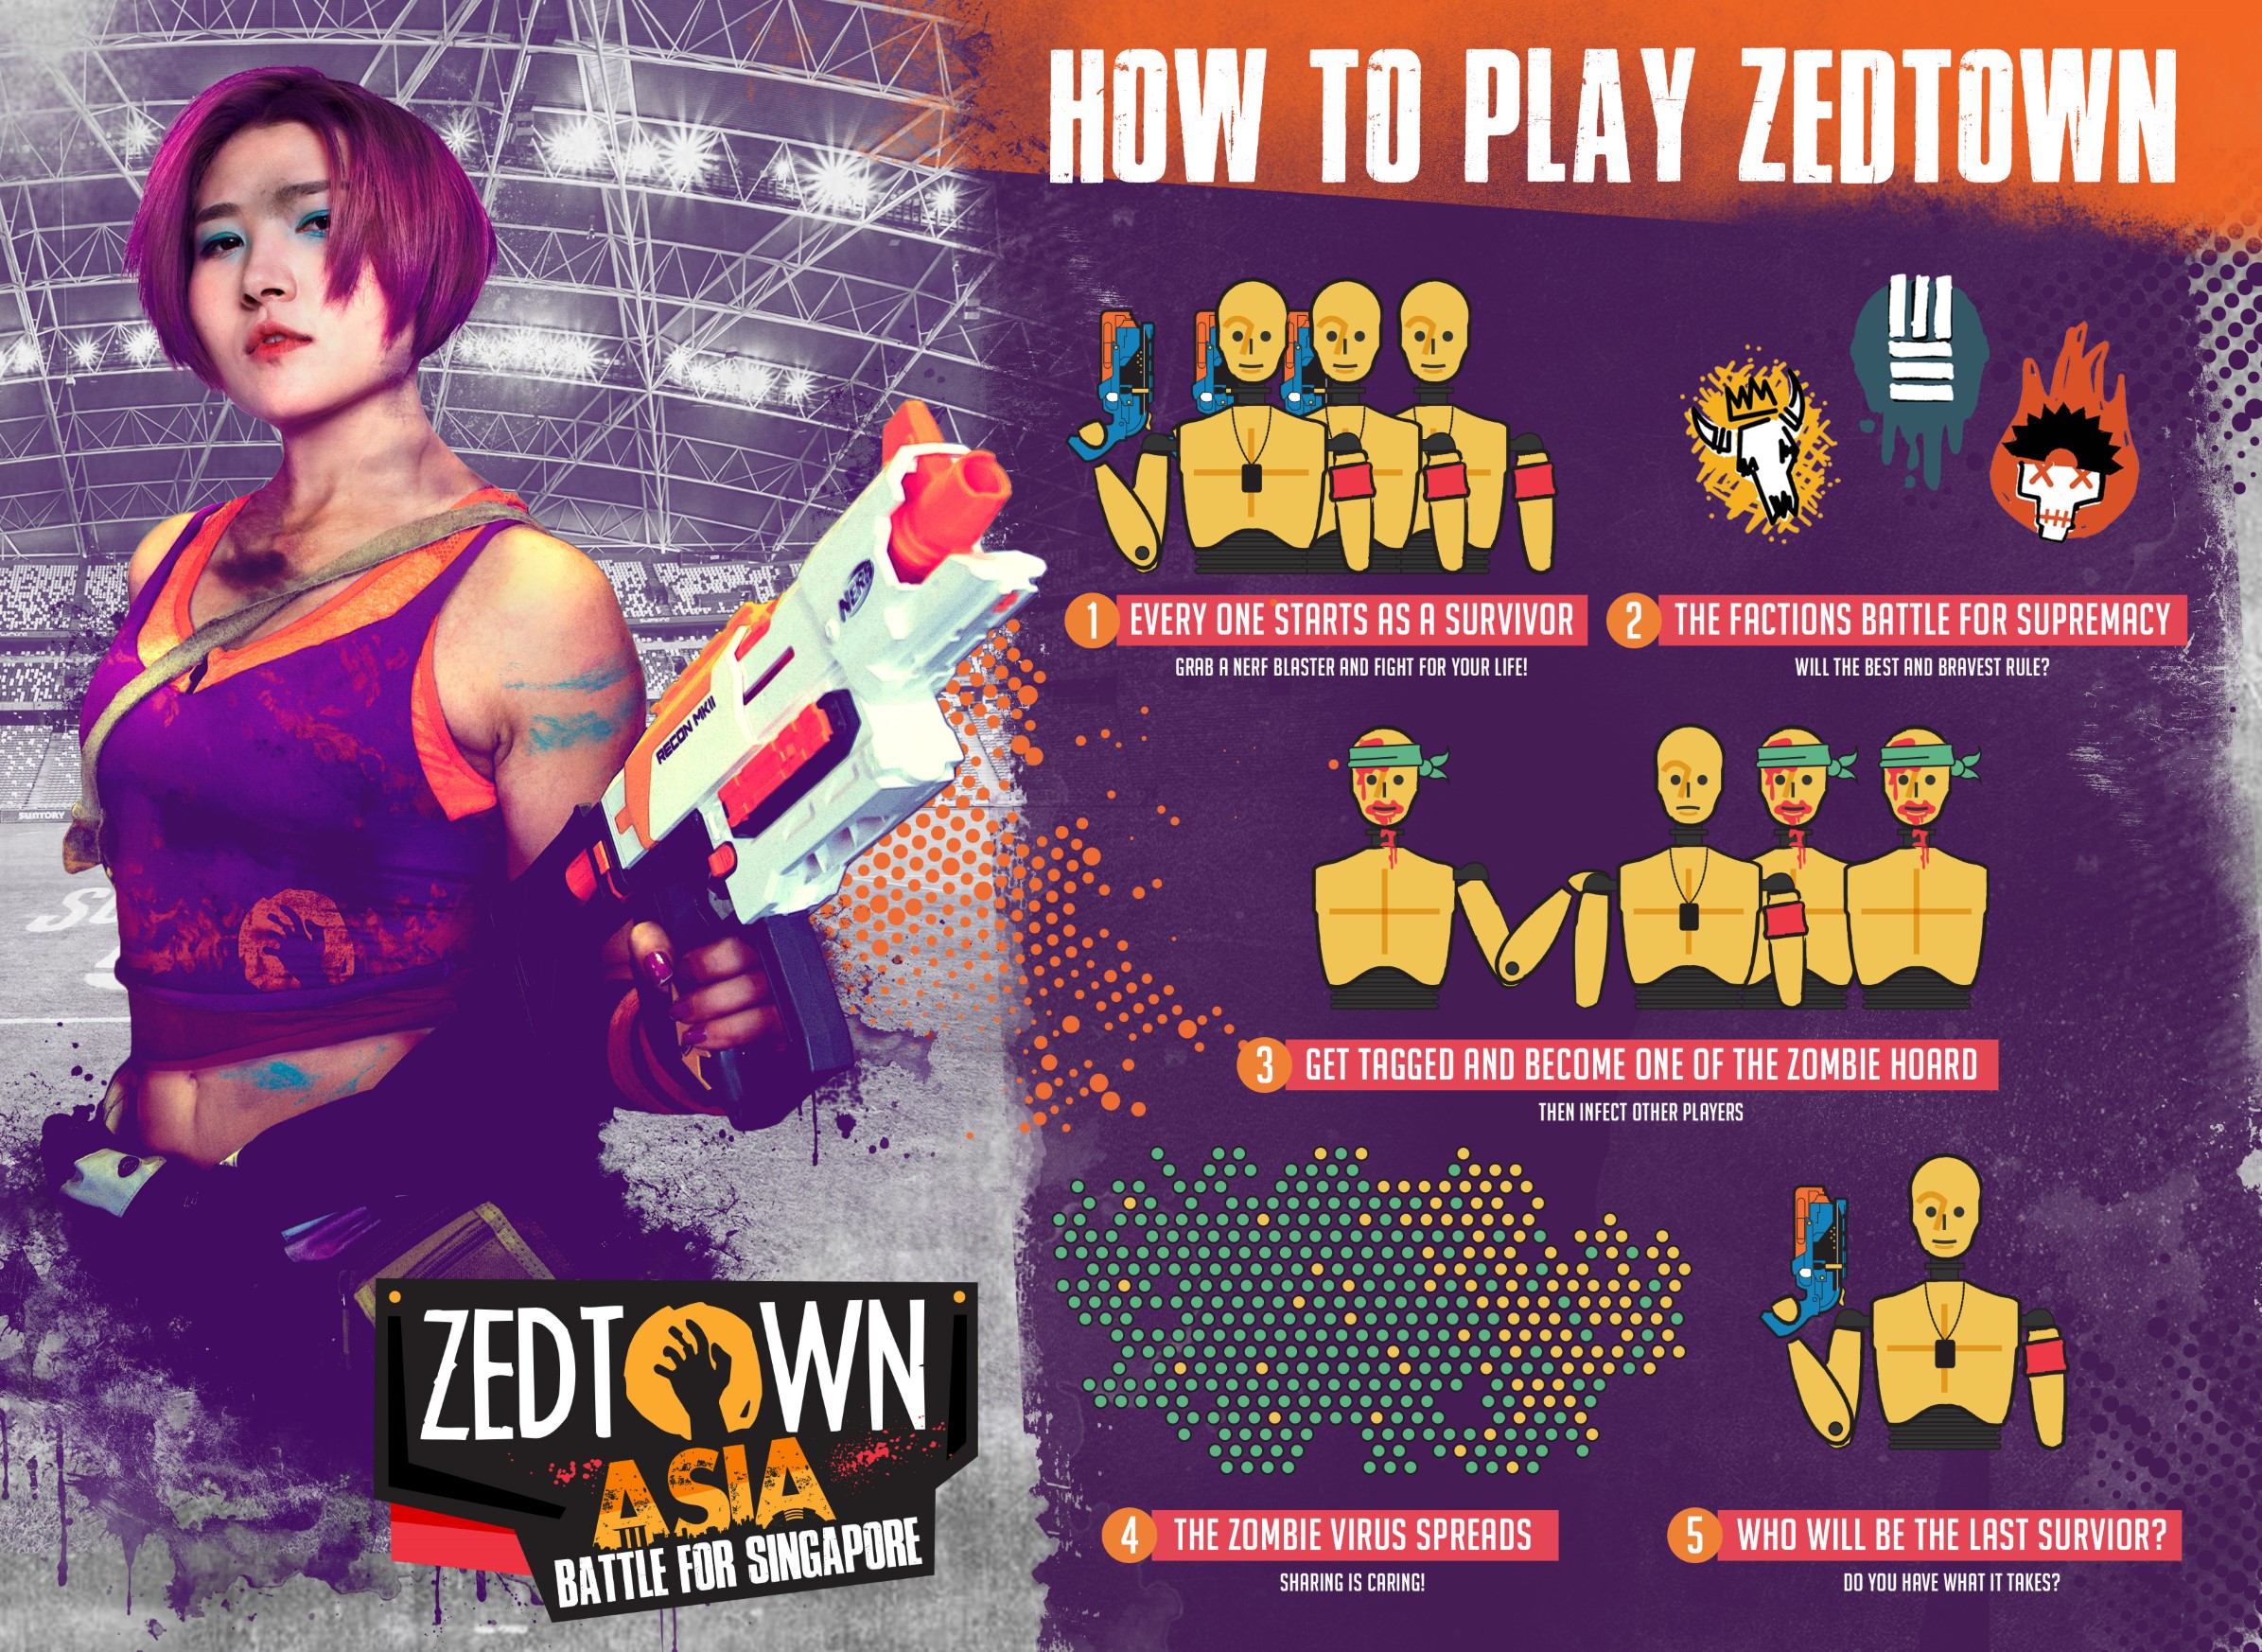 Zedtown Asia: Battle for Singapore - Asia’s first-ever zombie survival game happening October 2019 - Alvinology